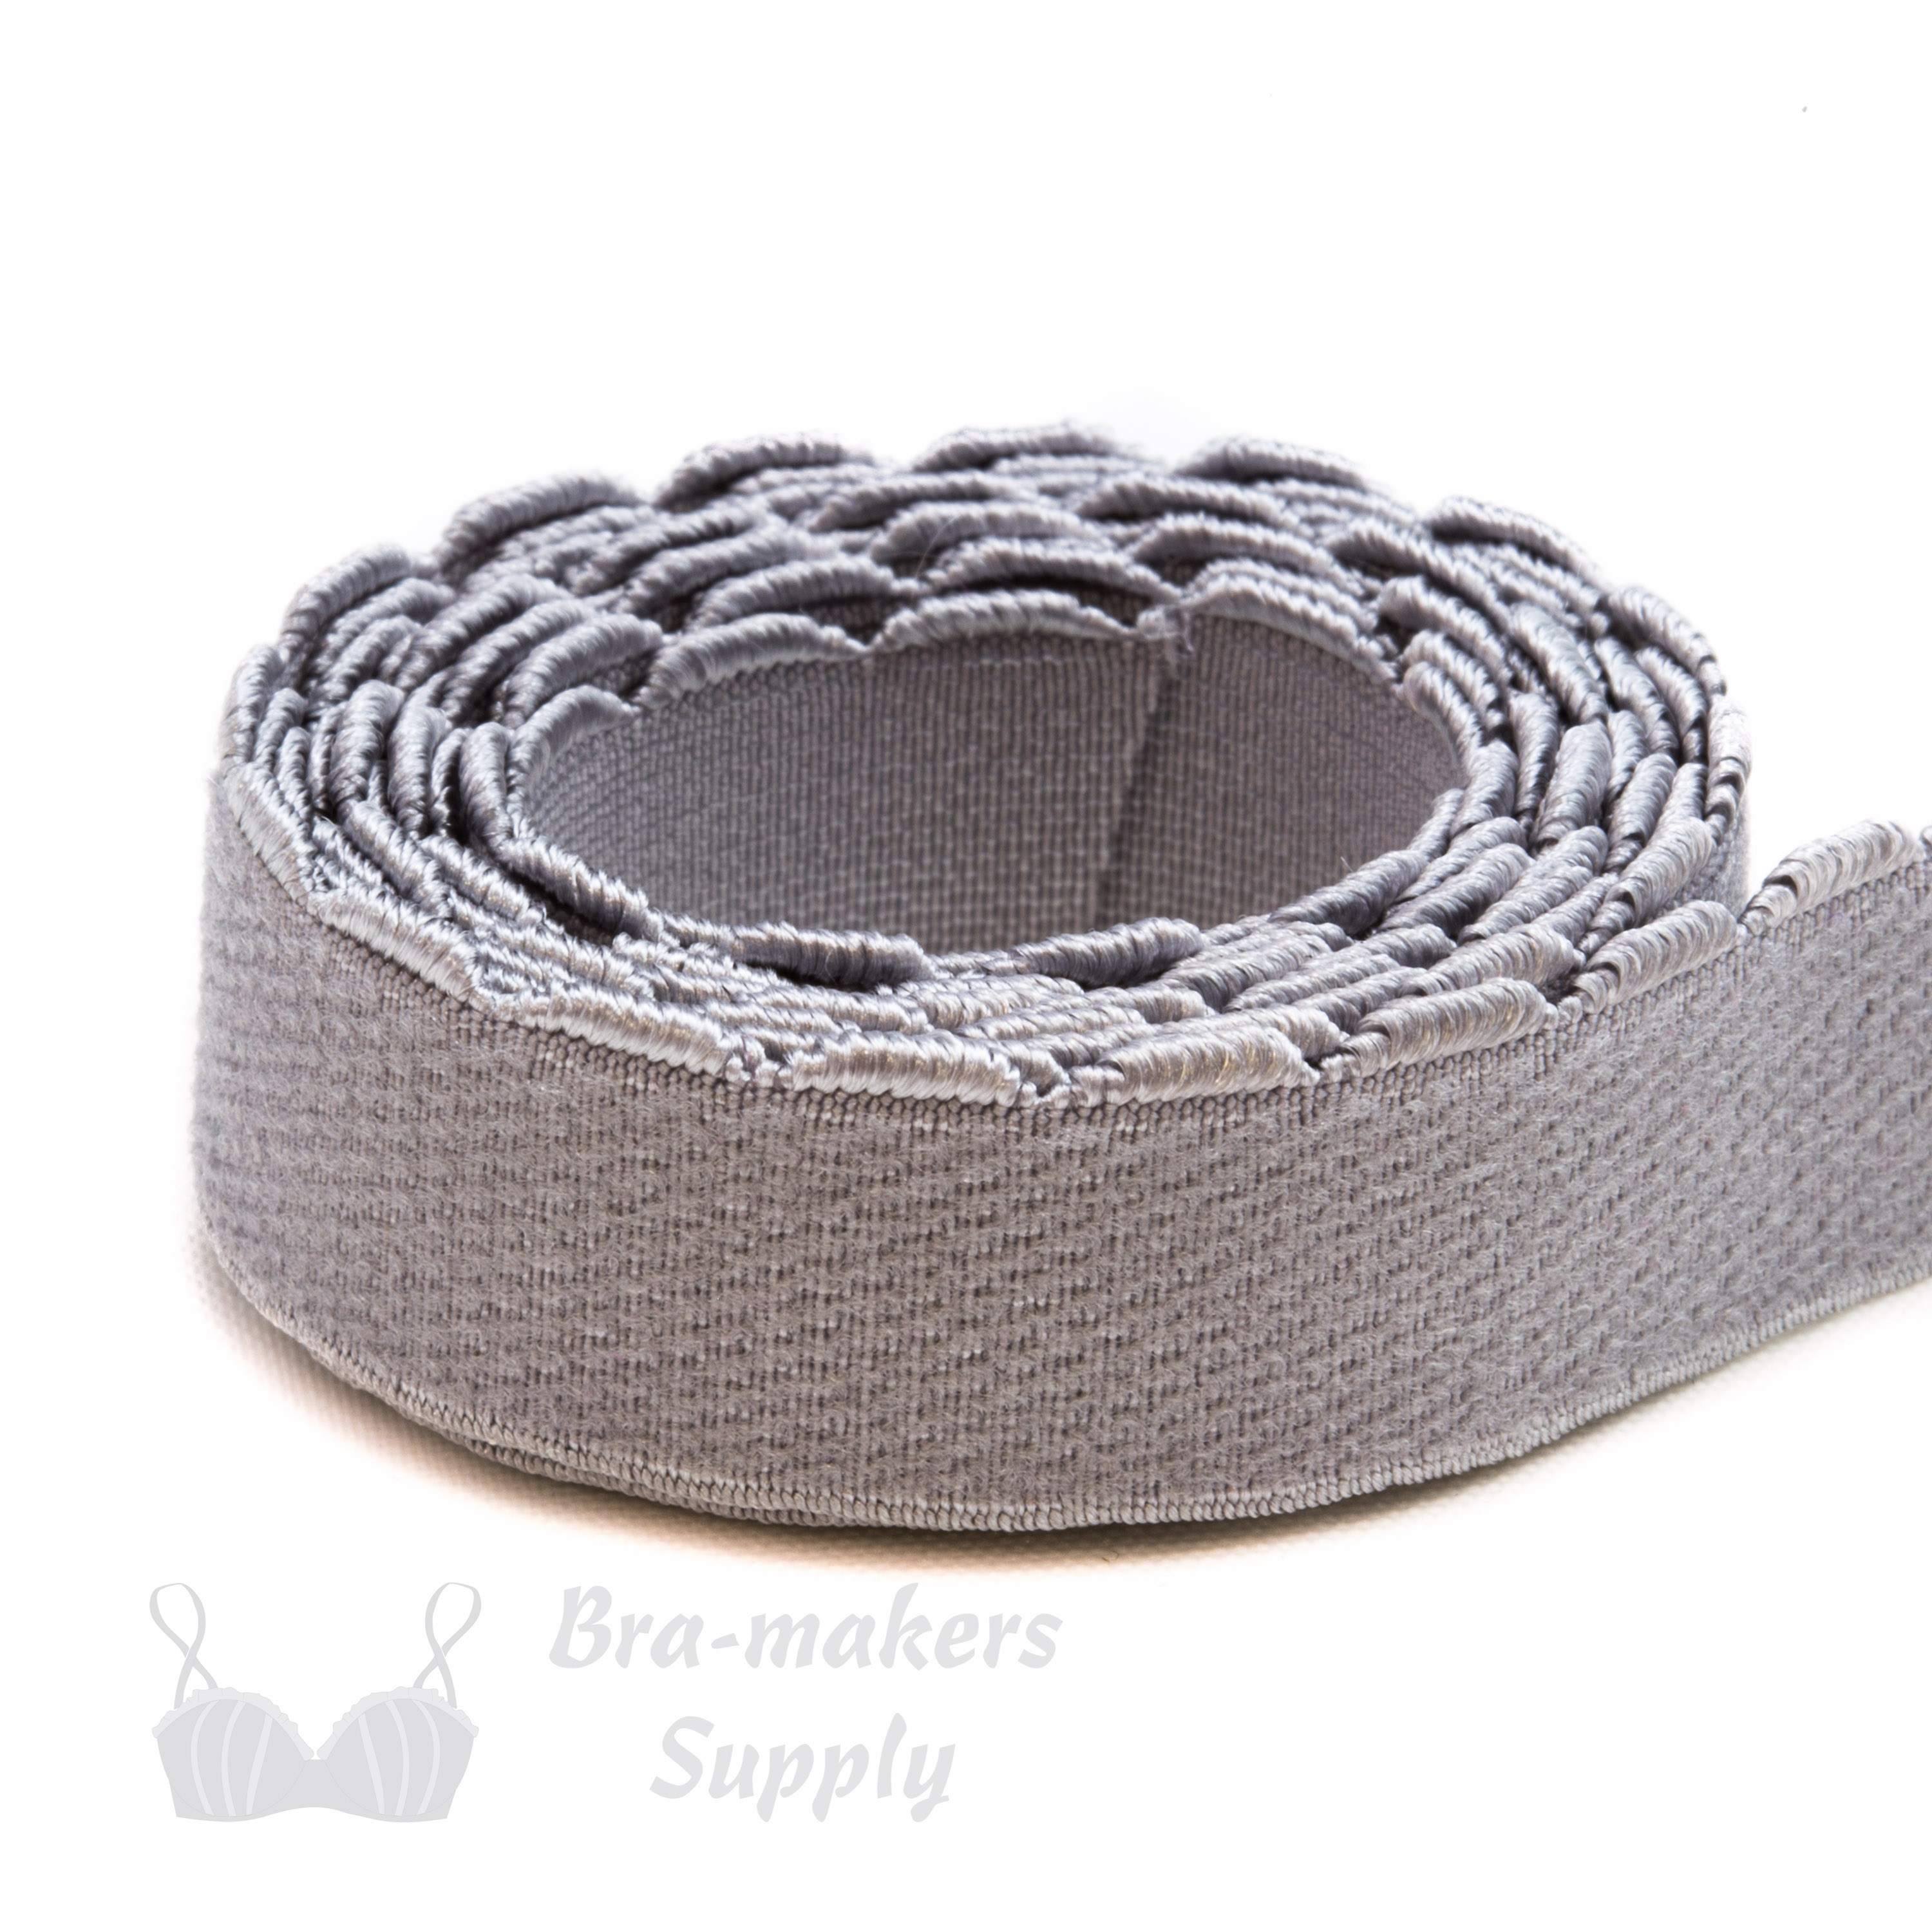 Great Deals On Flexible And Durable Wholesale bra elastic image